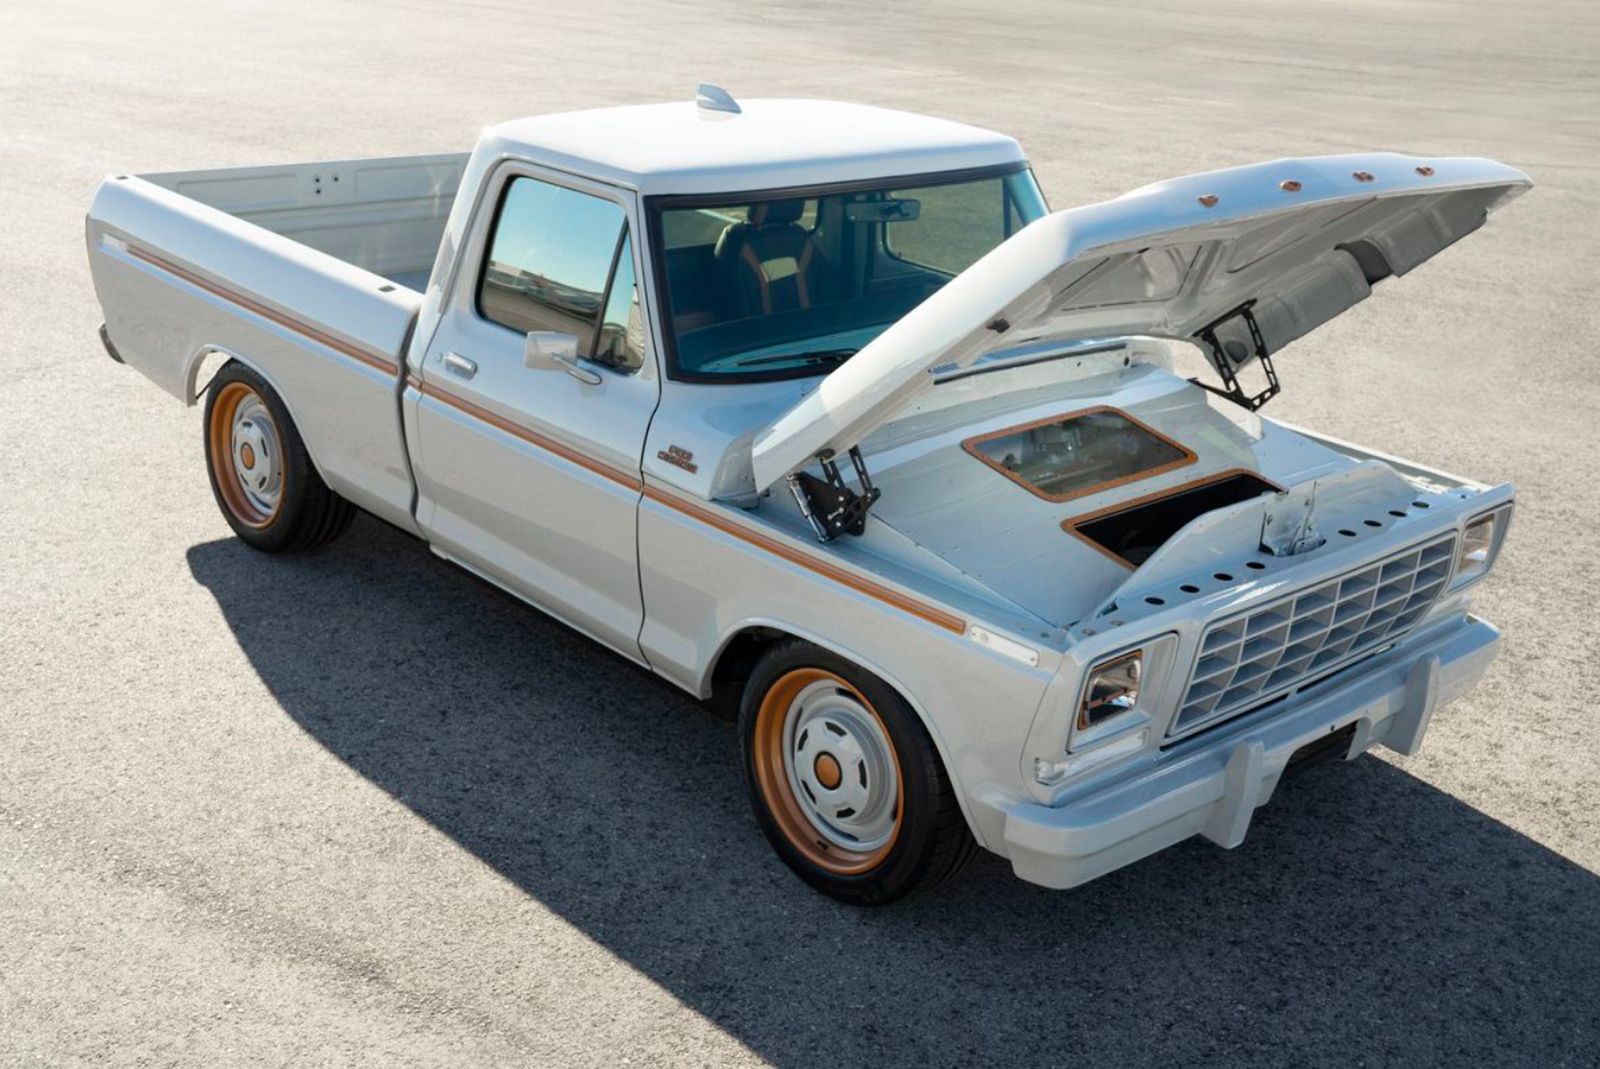 Ford turned its classic 1978 F-100 pickup into an EV, and it's a beaut 1 photo 1